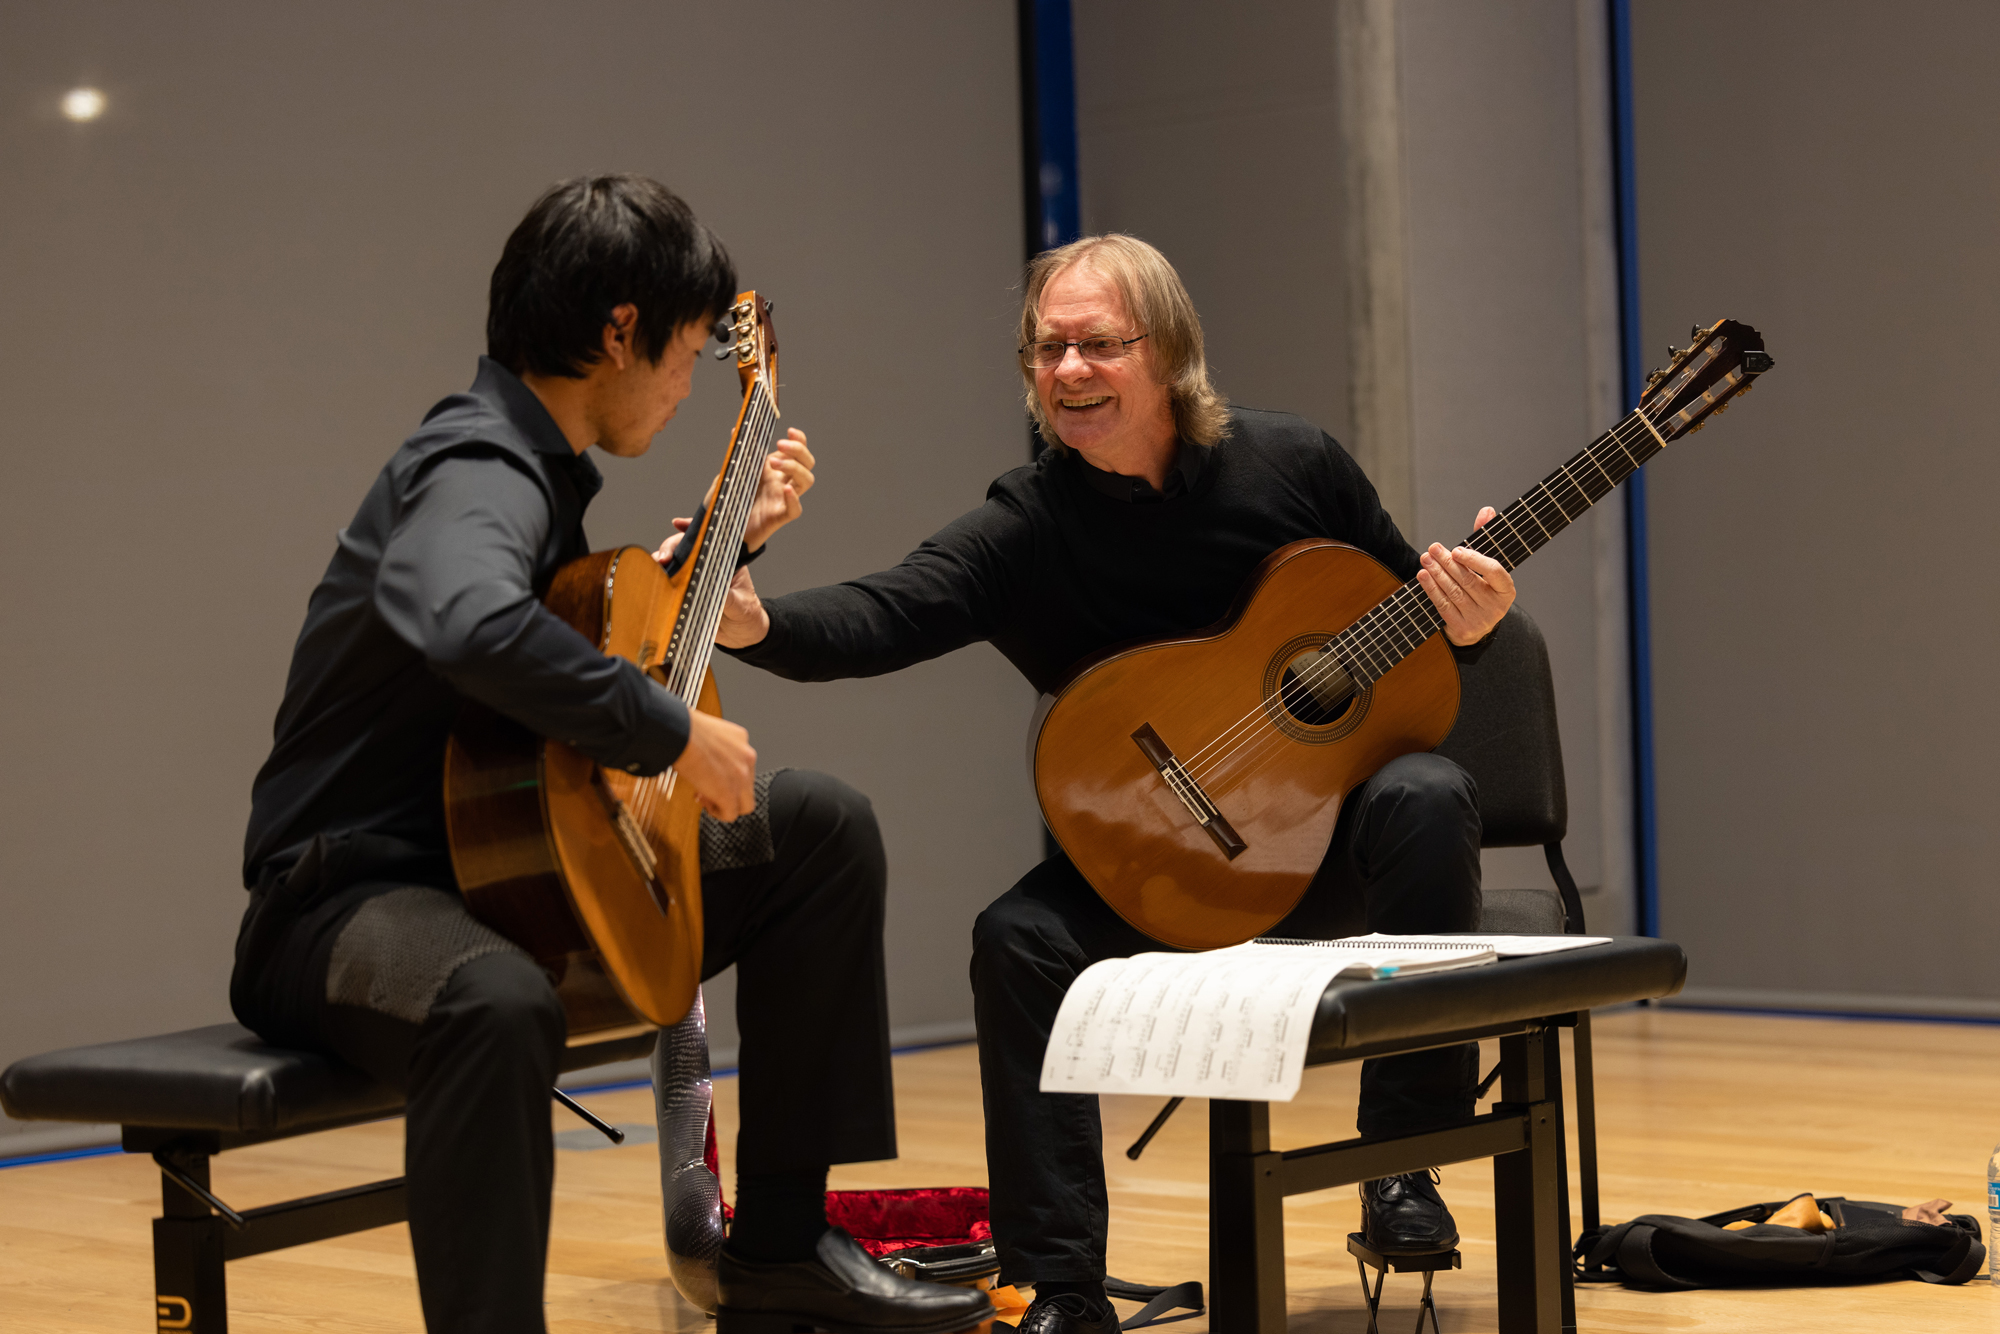 David Russell Teaches a student in a masterclass setting